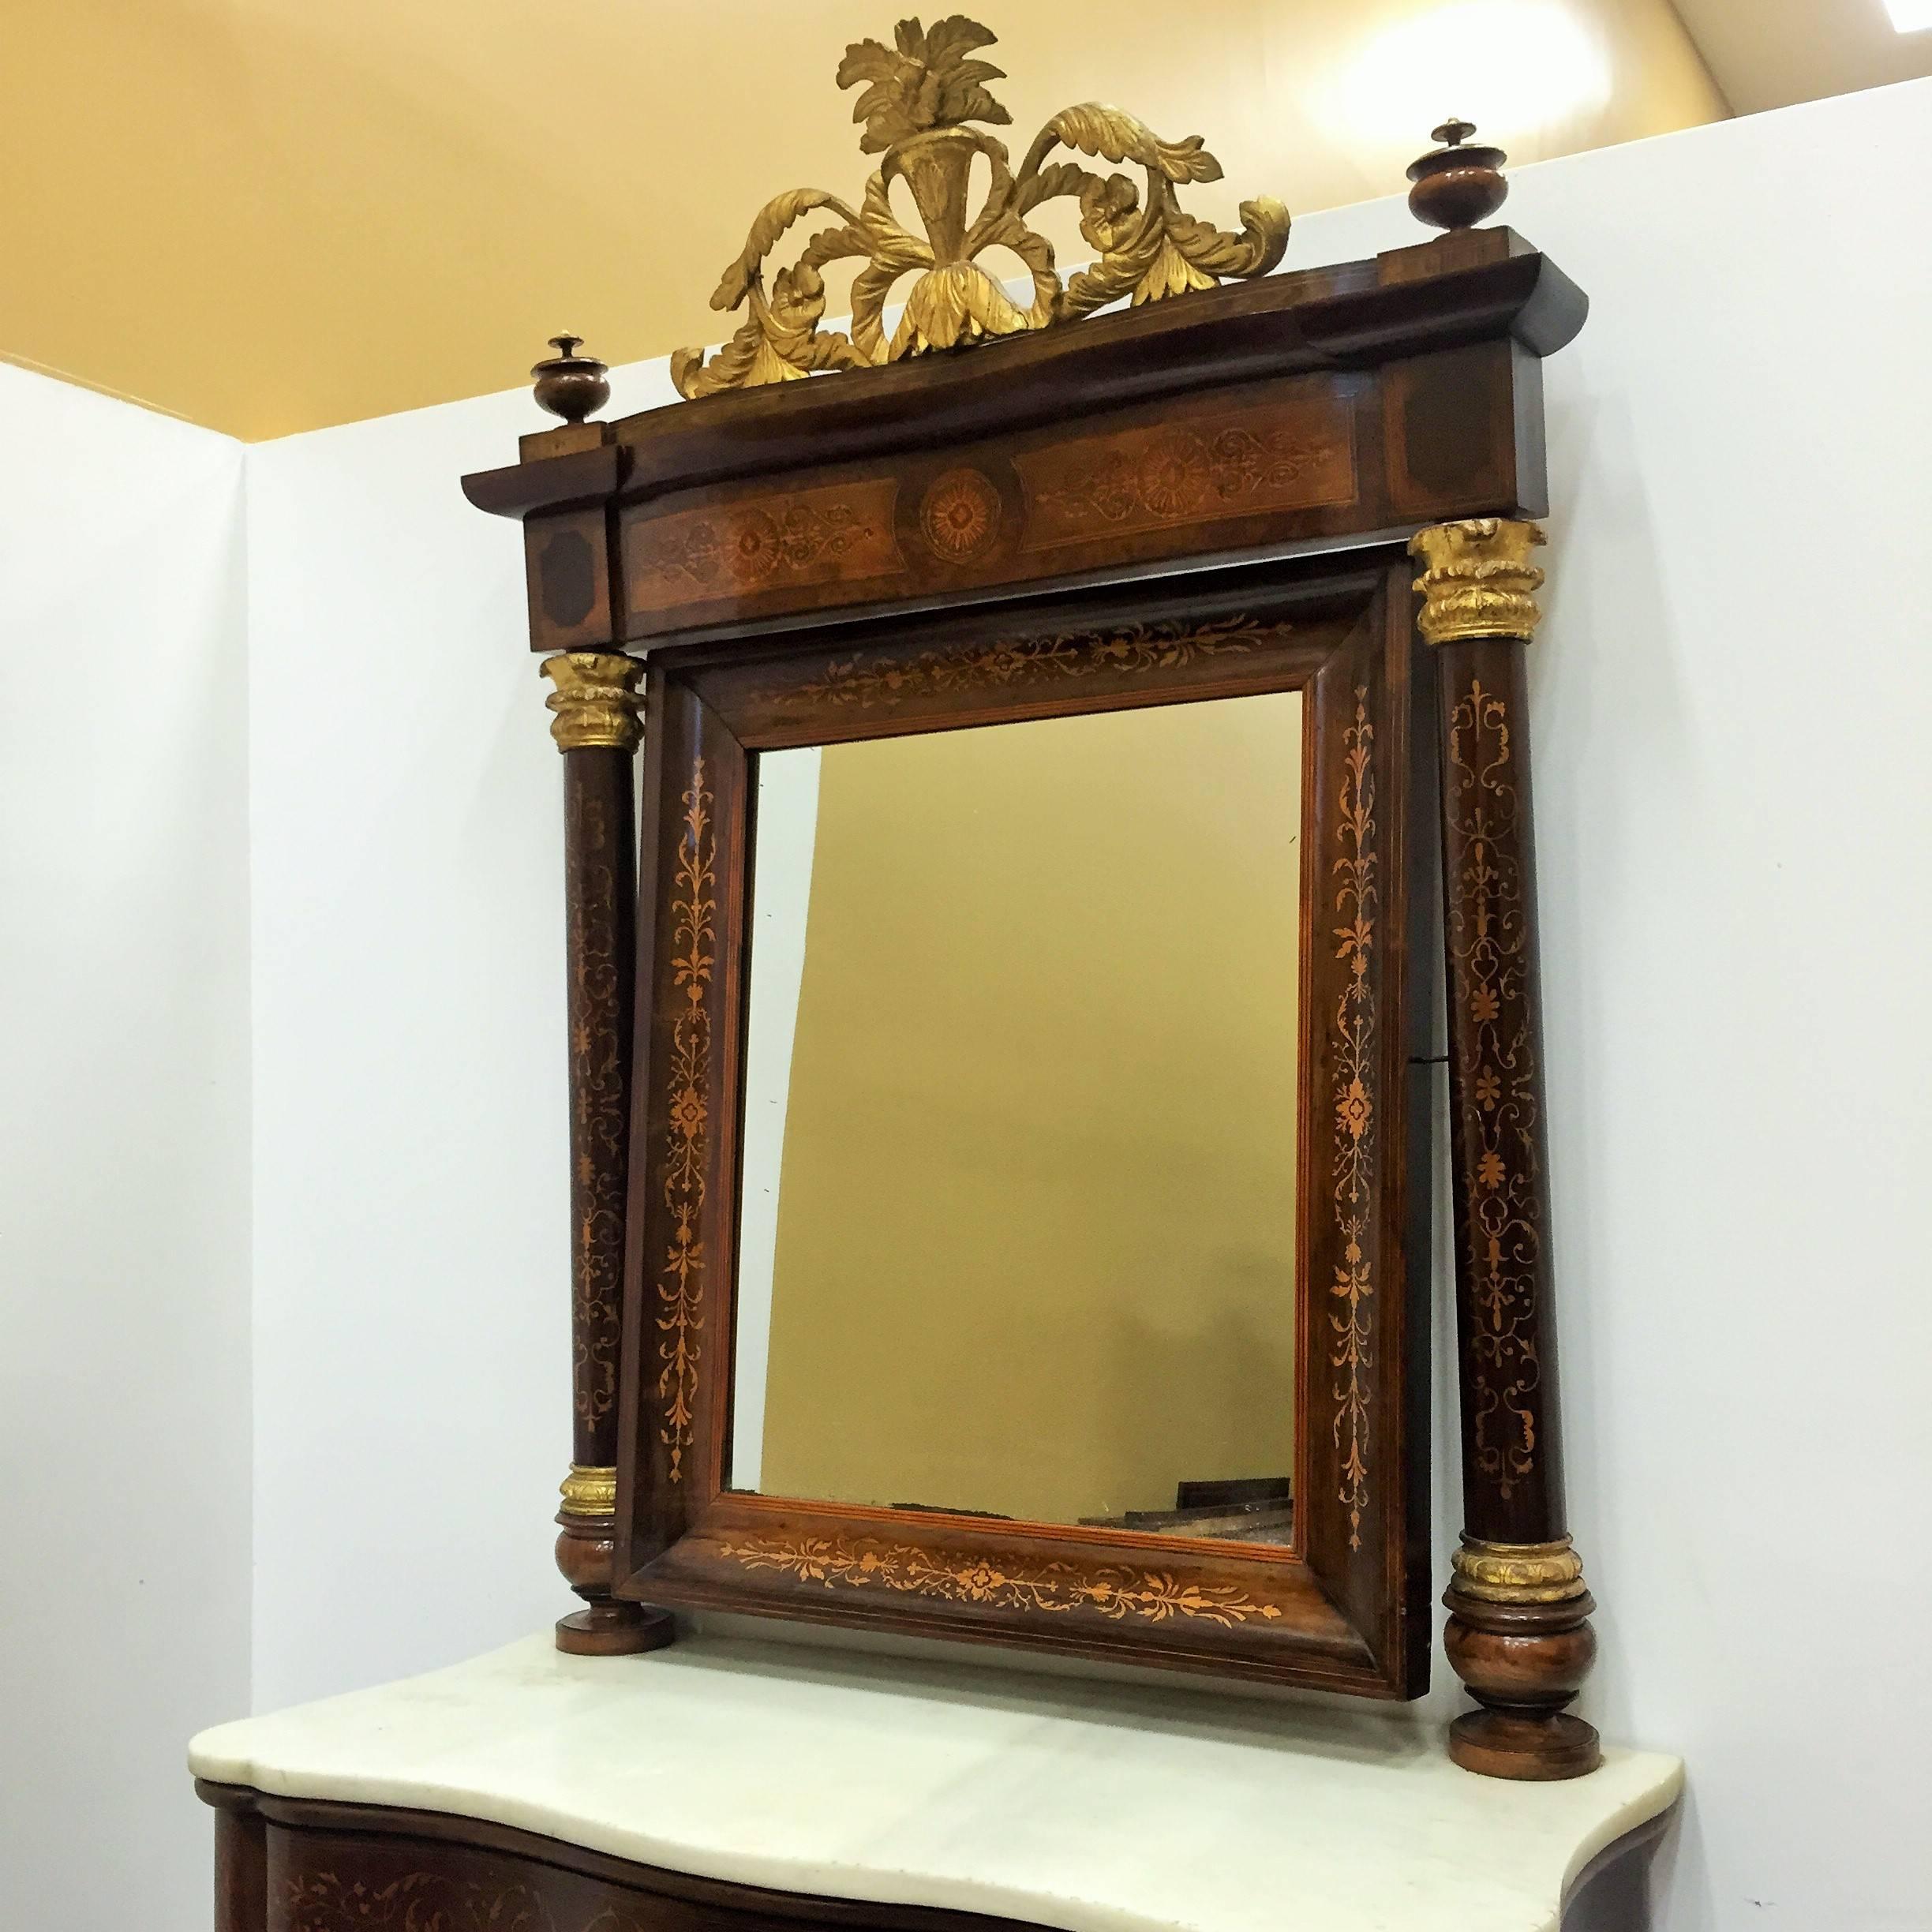 Fine Spanish Empire console with mirror in mahogany and rosewood with satinwood inlays, circa 1810.